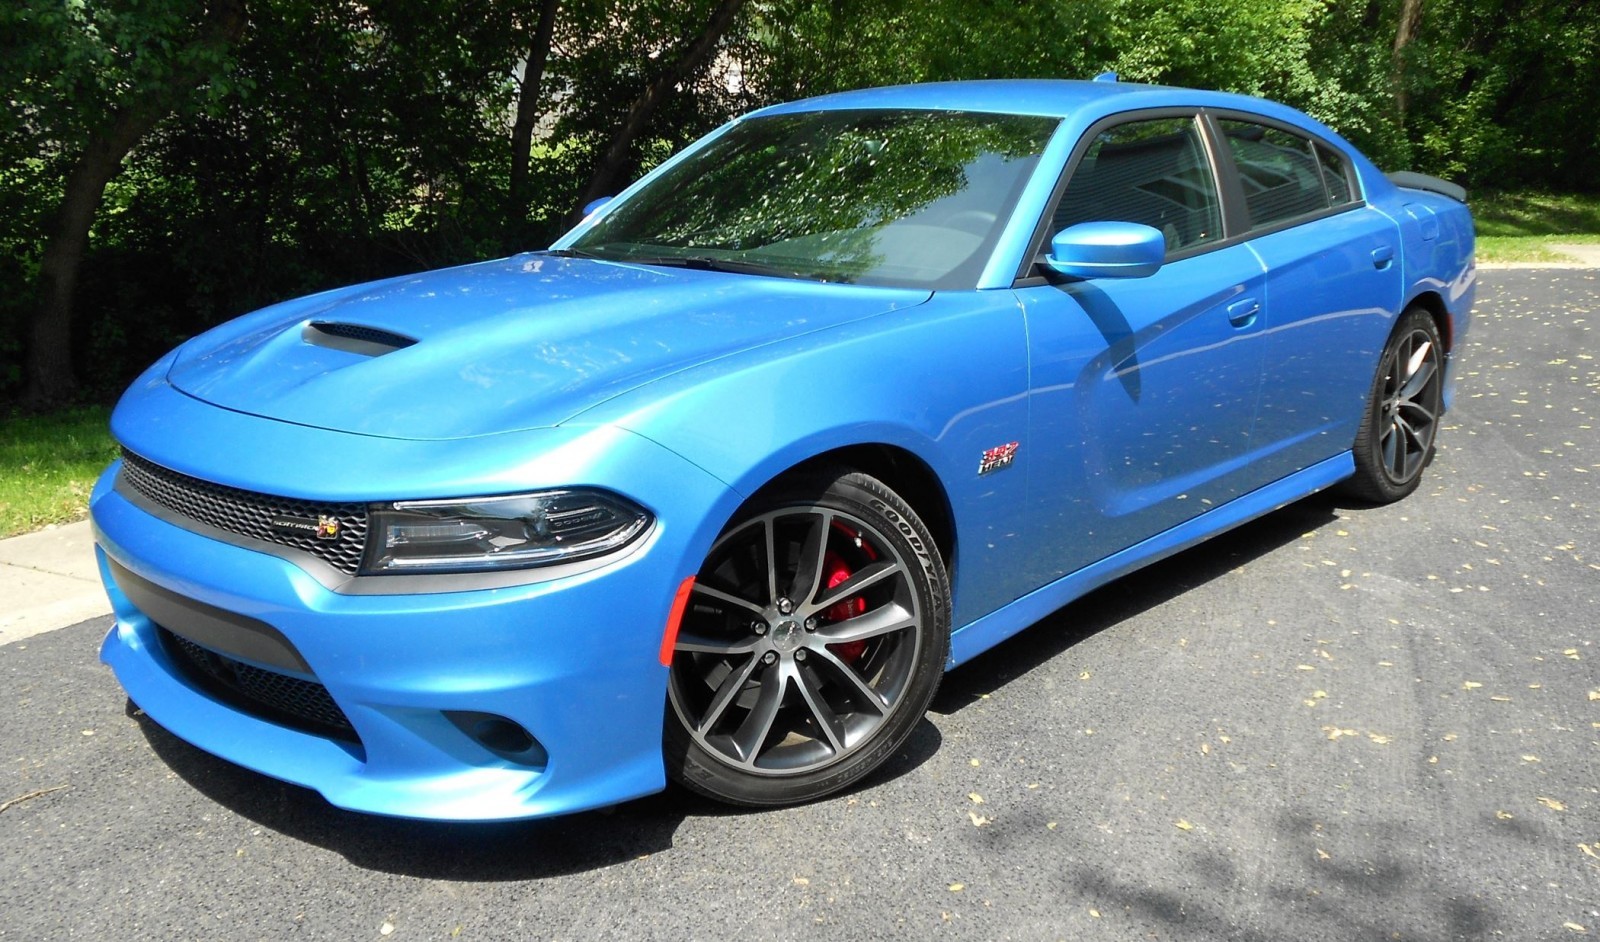 2015 Dodge Charger R/T 392 Scat Pack Review